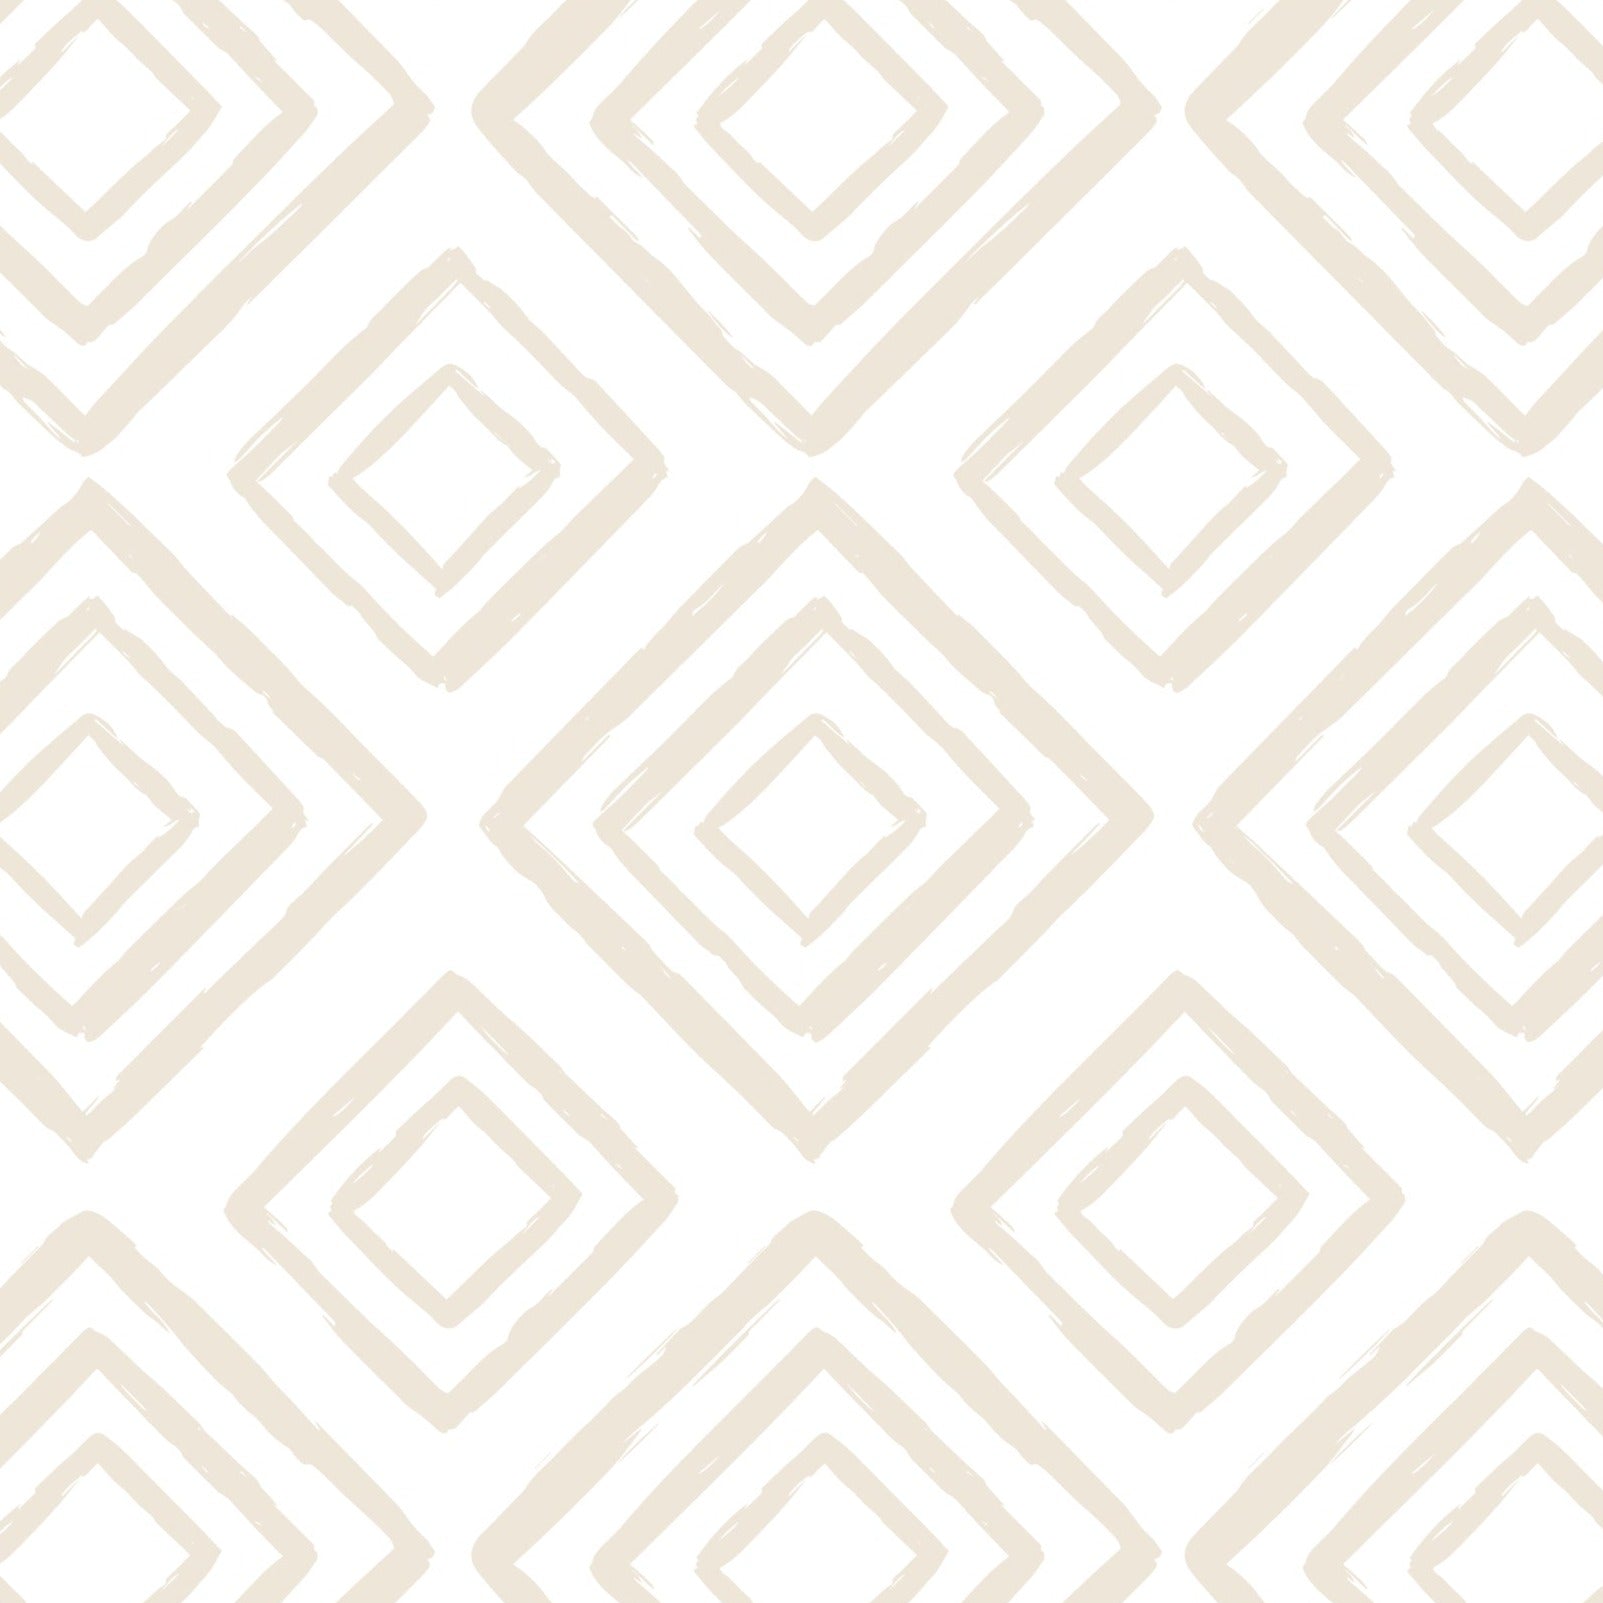 A geometric pattern wallpaper named Organic Shape Wallpaper 18, featuring a repetitive design of diamond shapes interconnected with lines, all in a muted taupe color on a white background, suitable for contemporary interiors.